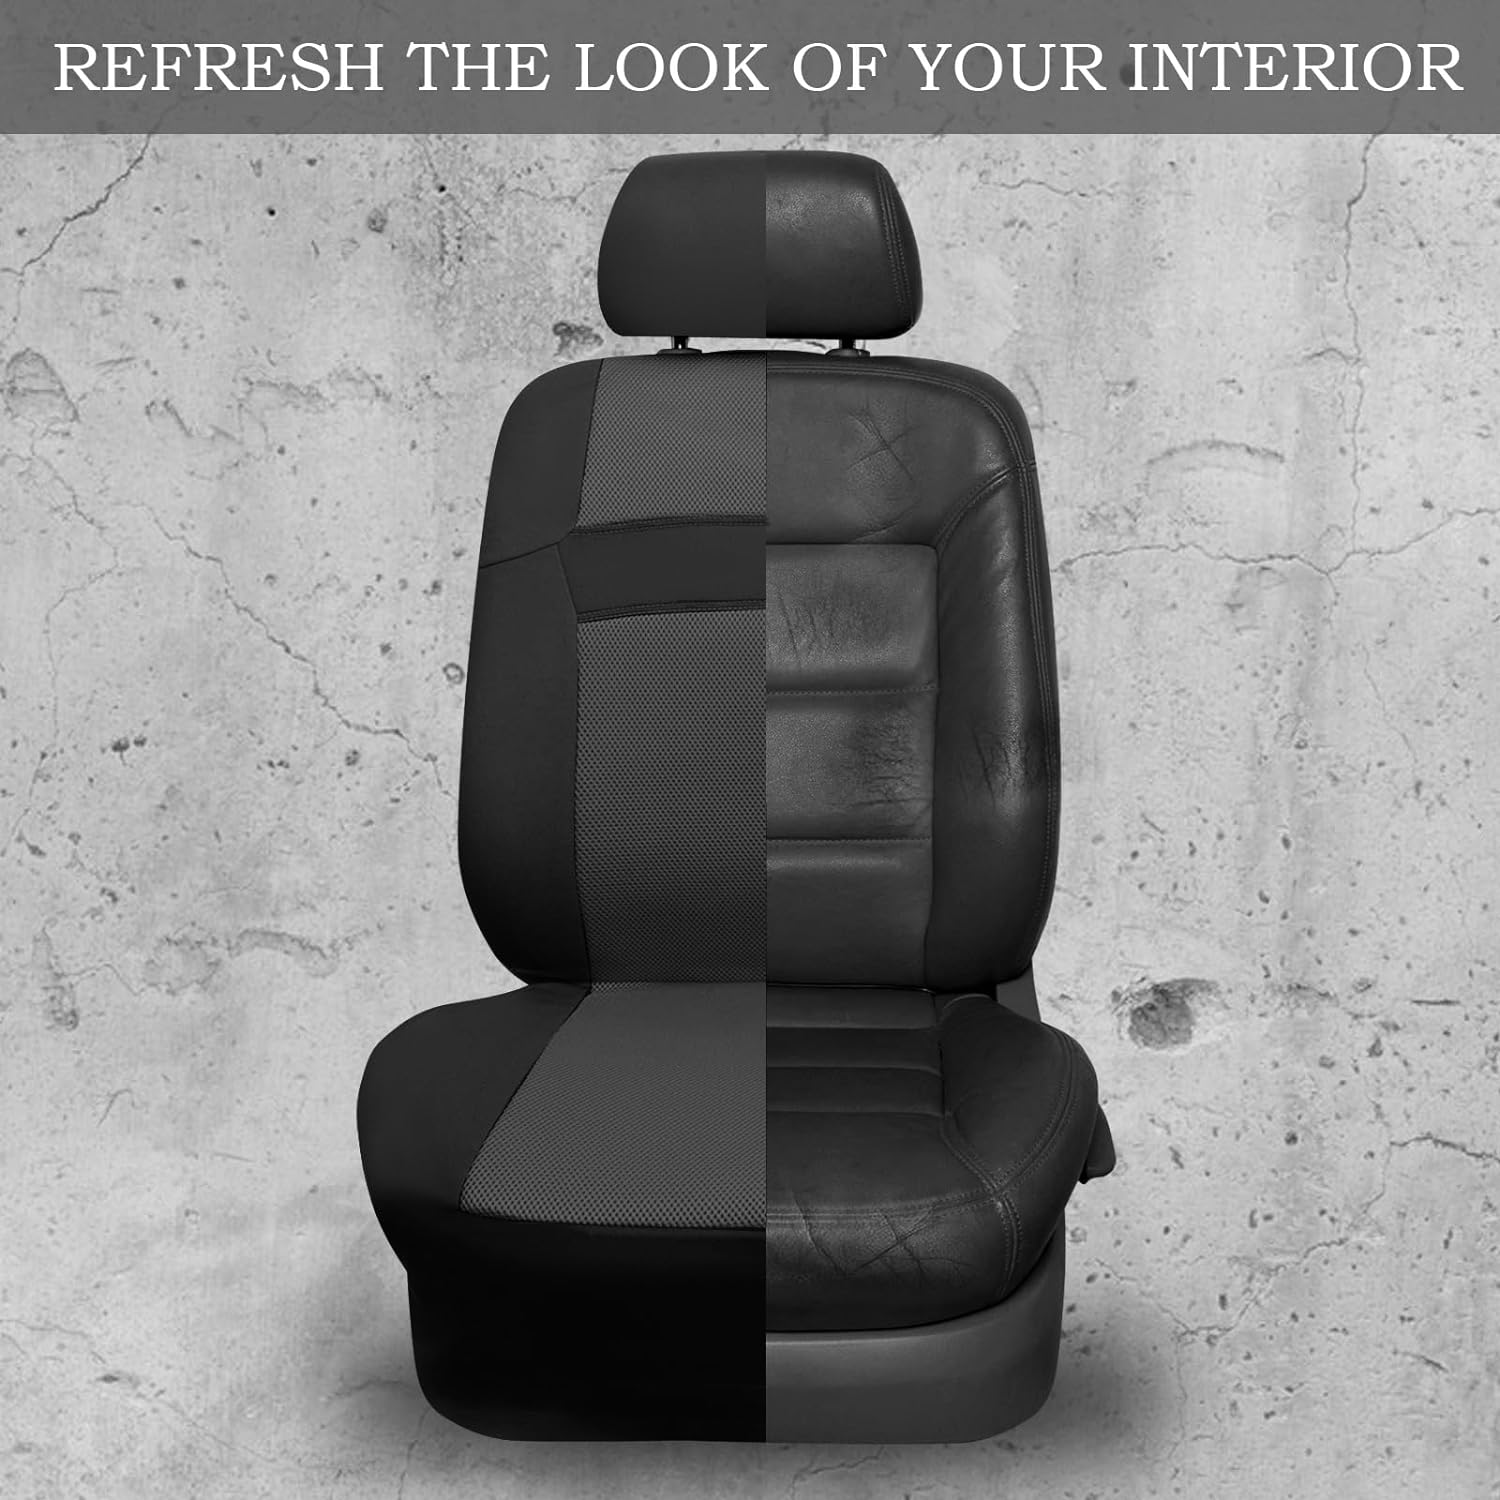 CAR PASS Car Seat Covers Front Seats Only & Car Mats, 3D Air Mesh Car Seat Cover with 5mm Composite Sponge Inside,Airbag Compatible Universal Fit SUV,Vans,Sedan,Trucks